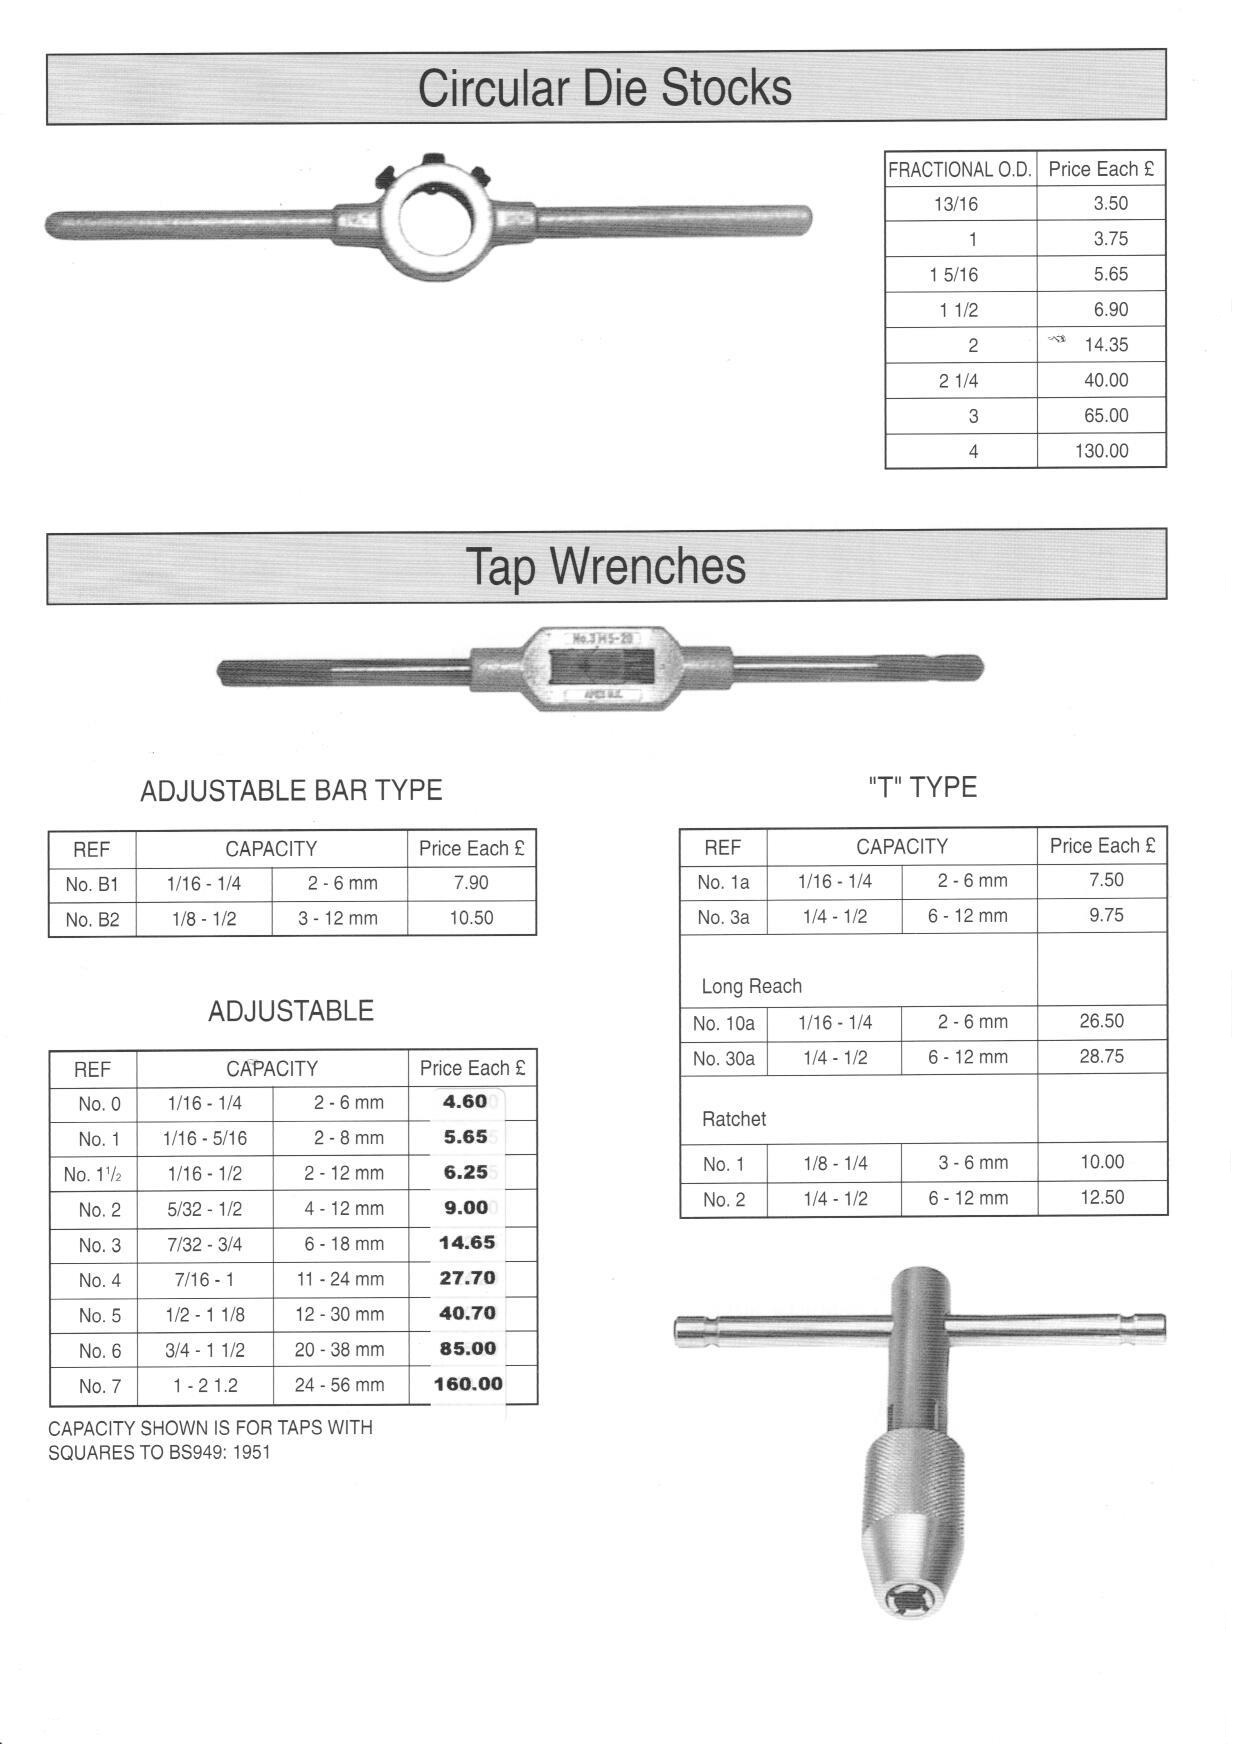 die stocks tap wrenches